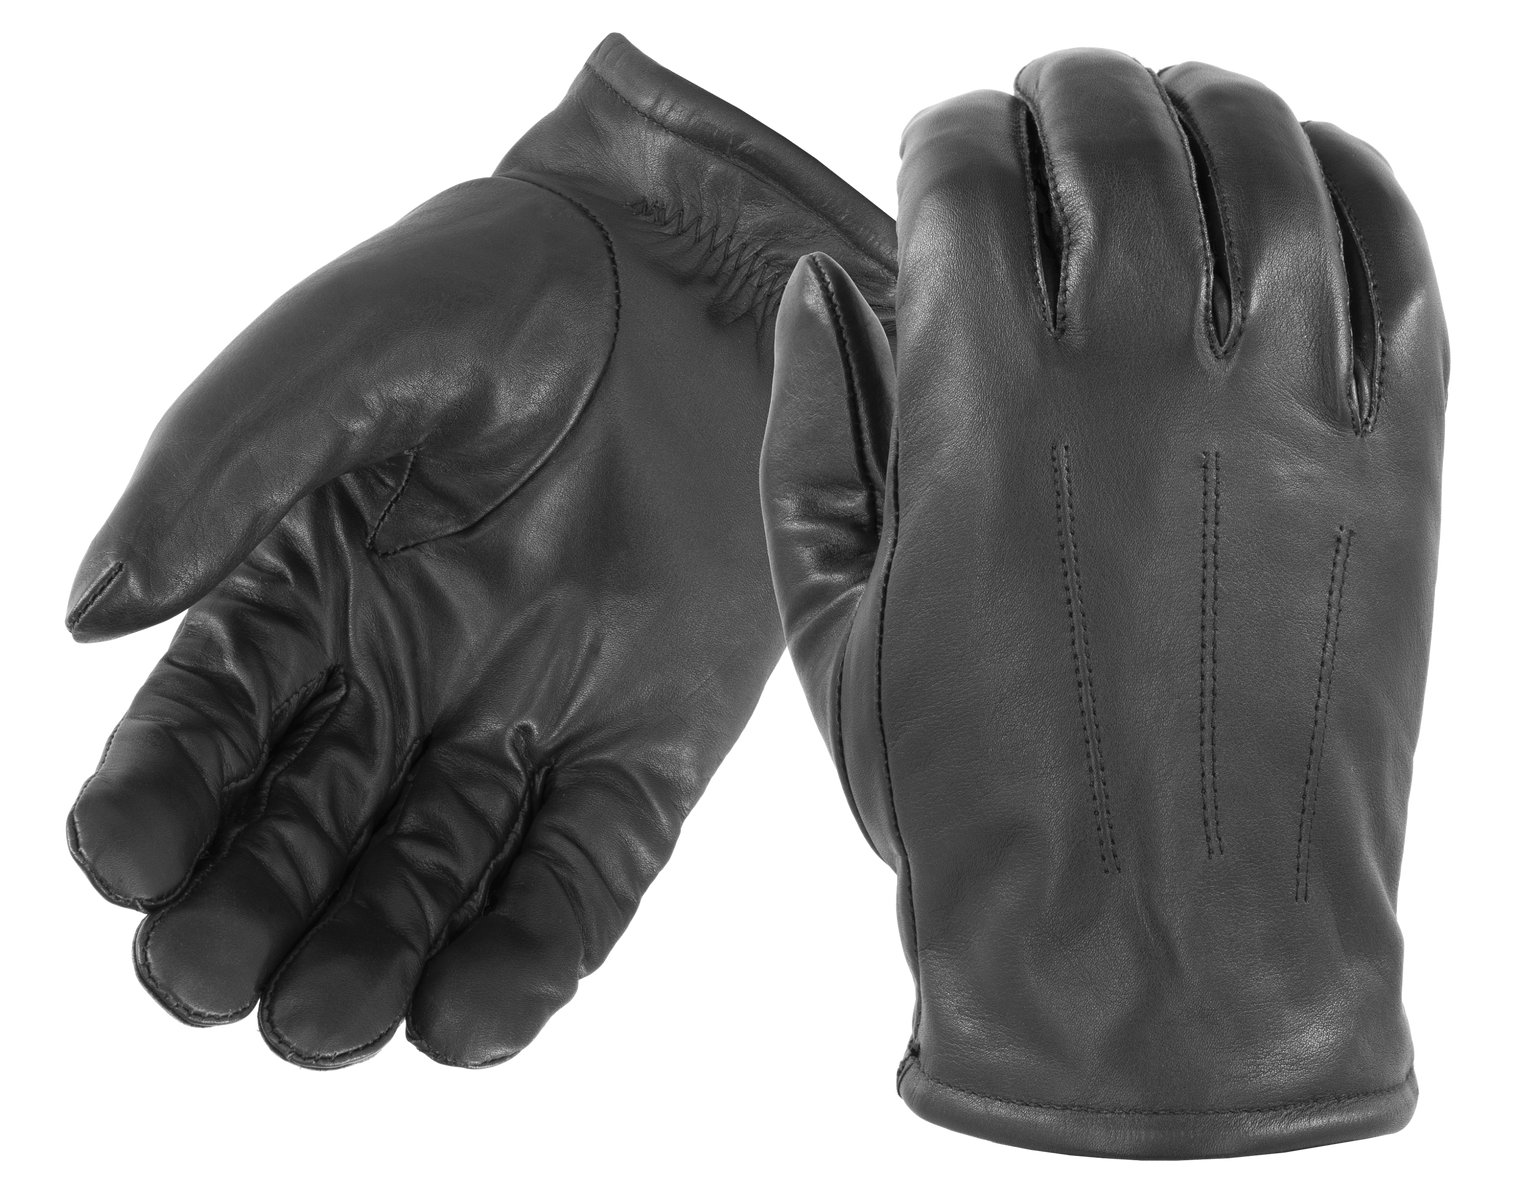 Thinsulate Leather Dress Gloves